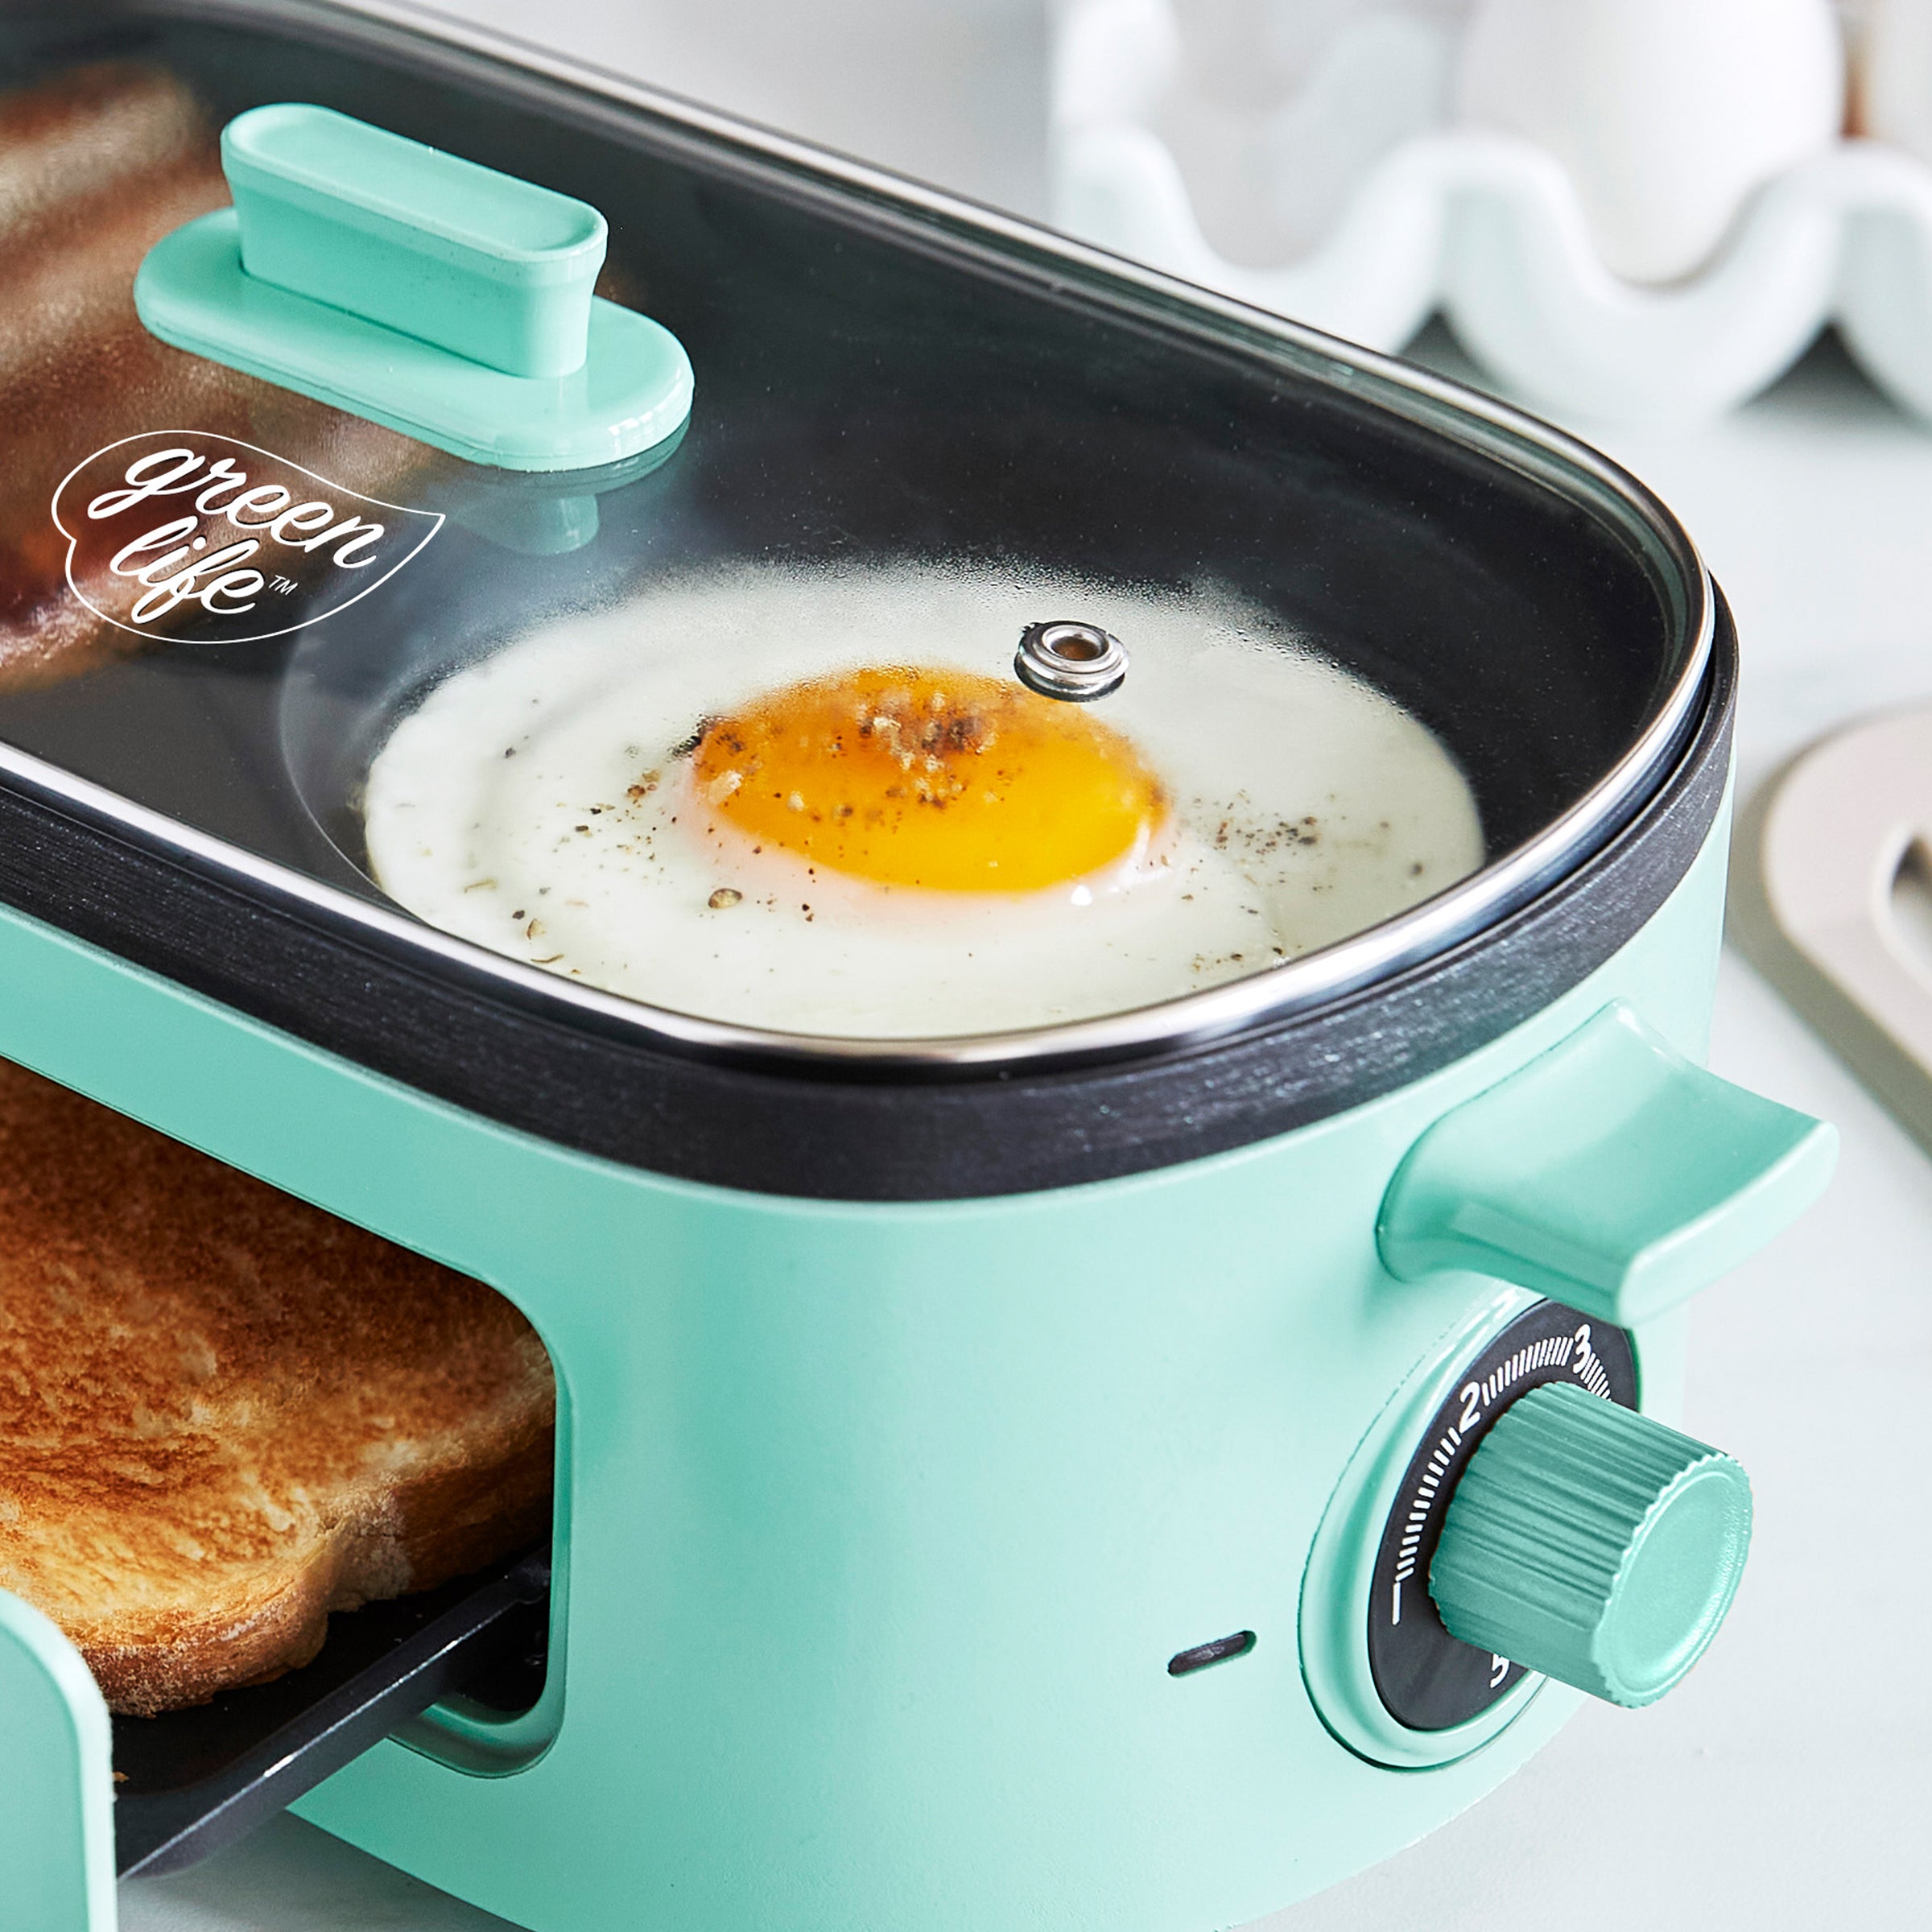 Portable Electric Family Size 3 In 1 Multi Function Breakfast Maker